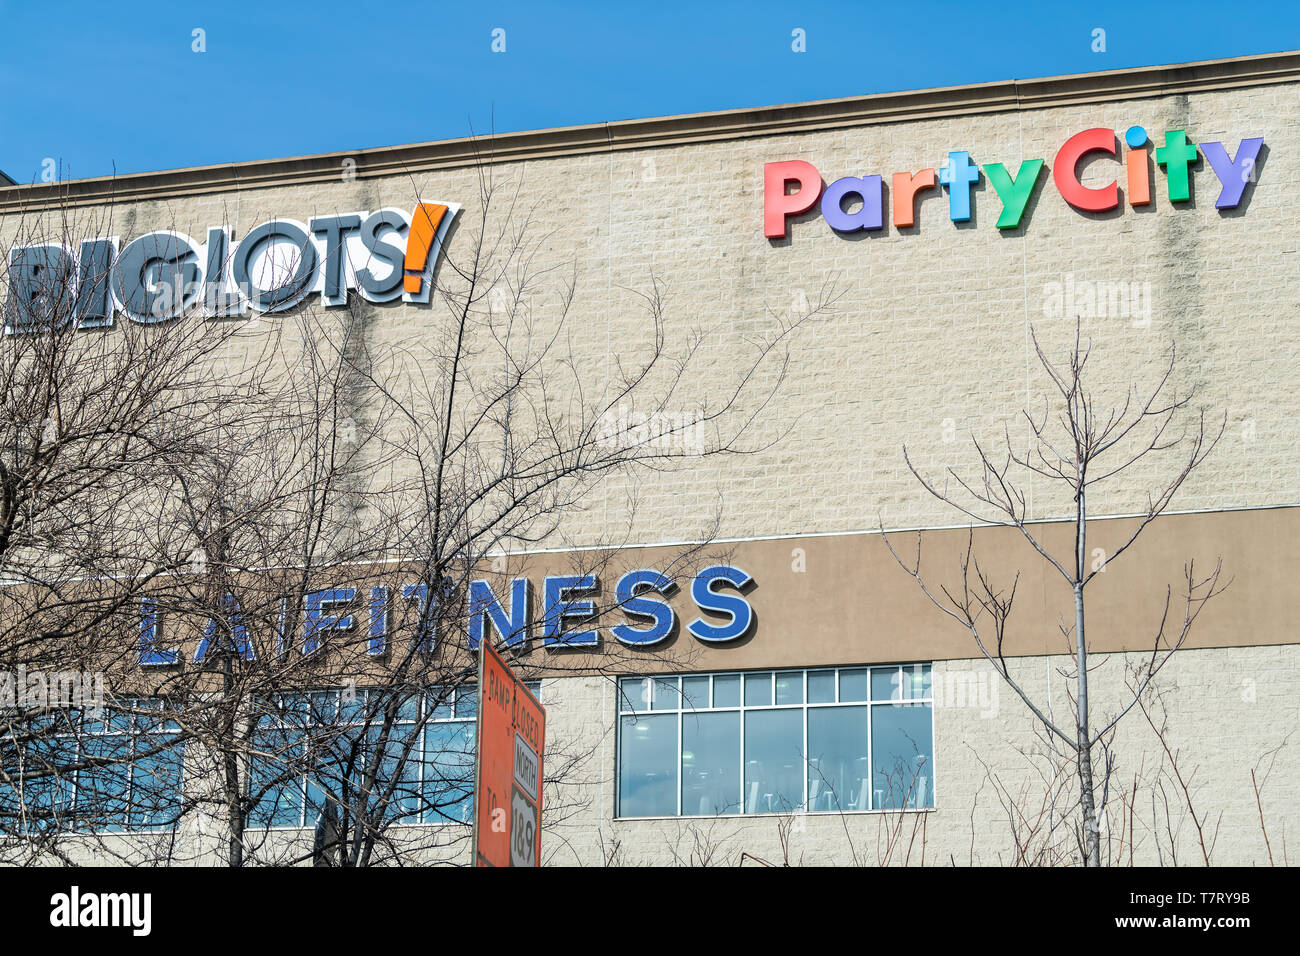 Weehawken, USA - April 6, 2018: City in New Jersey with Big Lots and Party city stores in shopping mall Stock Photo